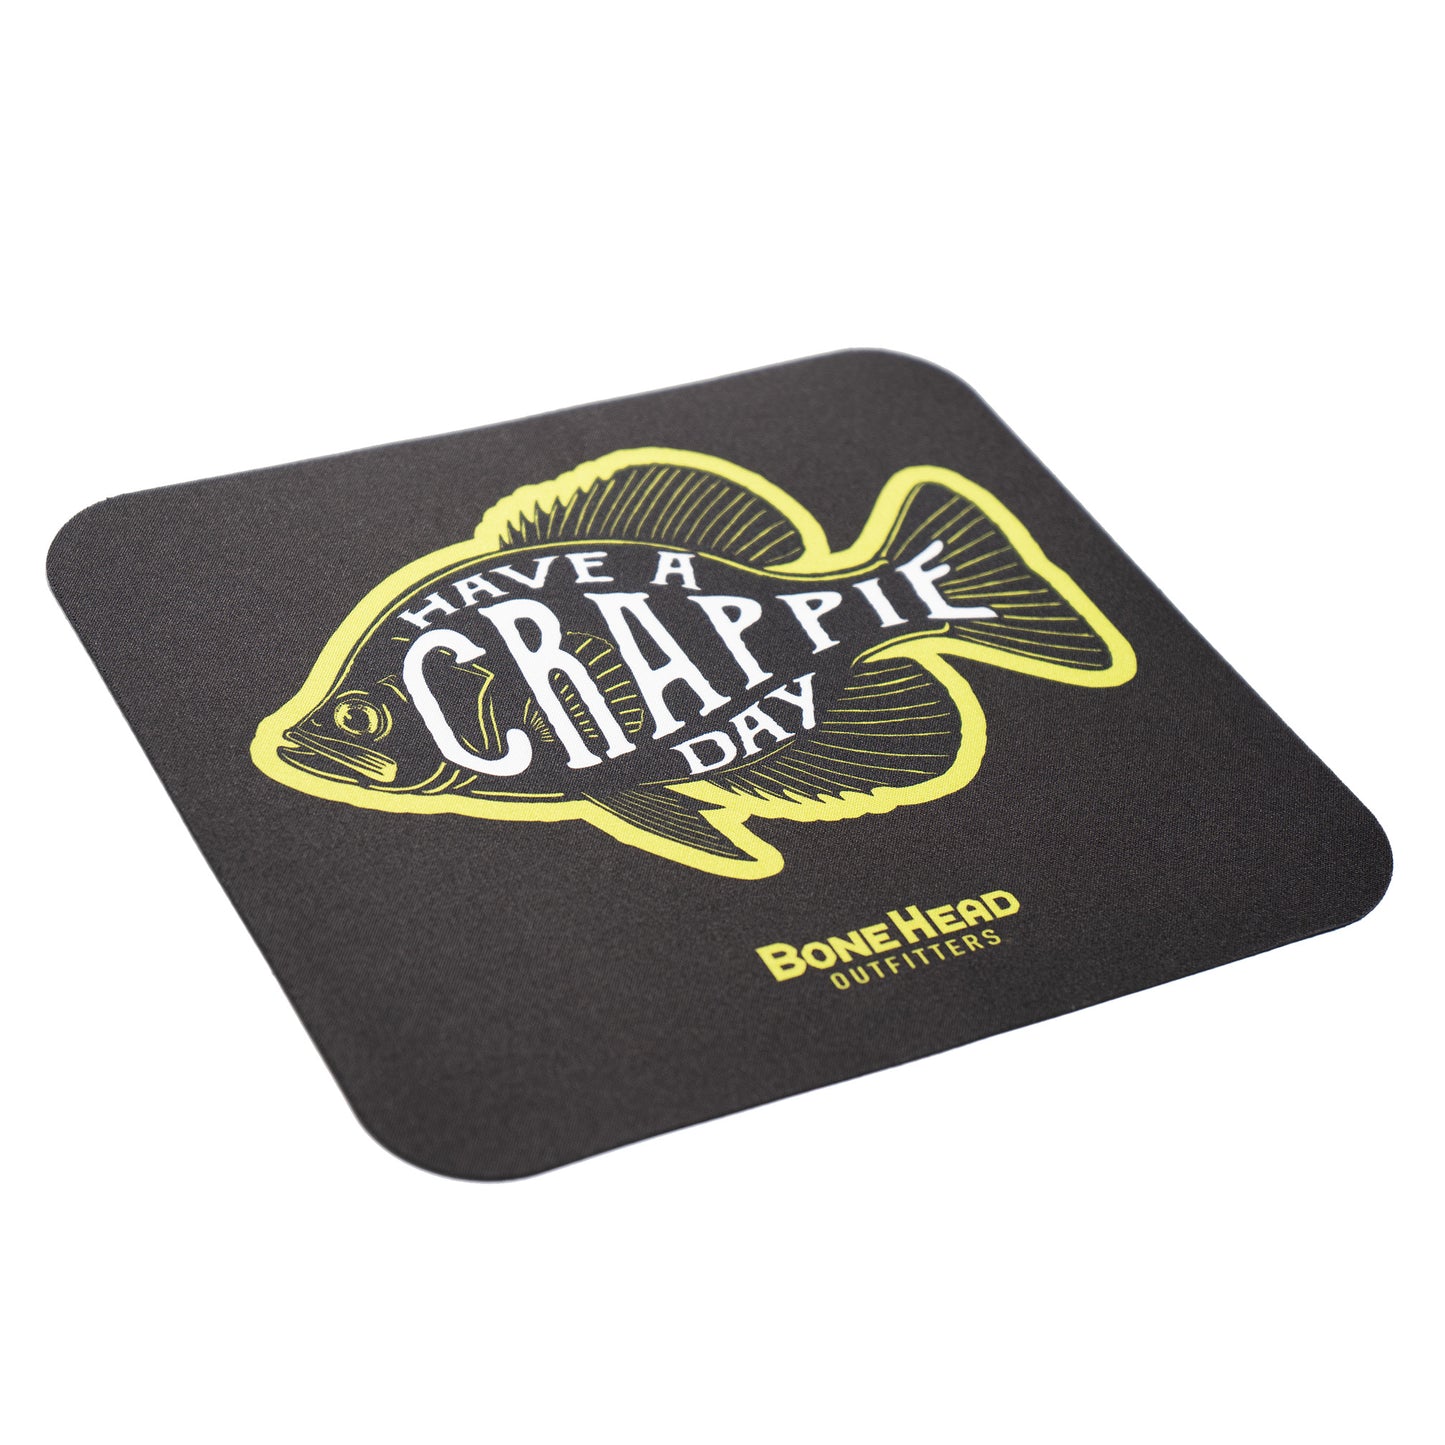 Have a Crappie Day Mouse Pad